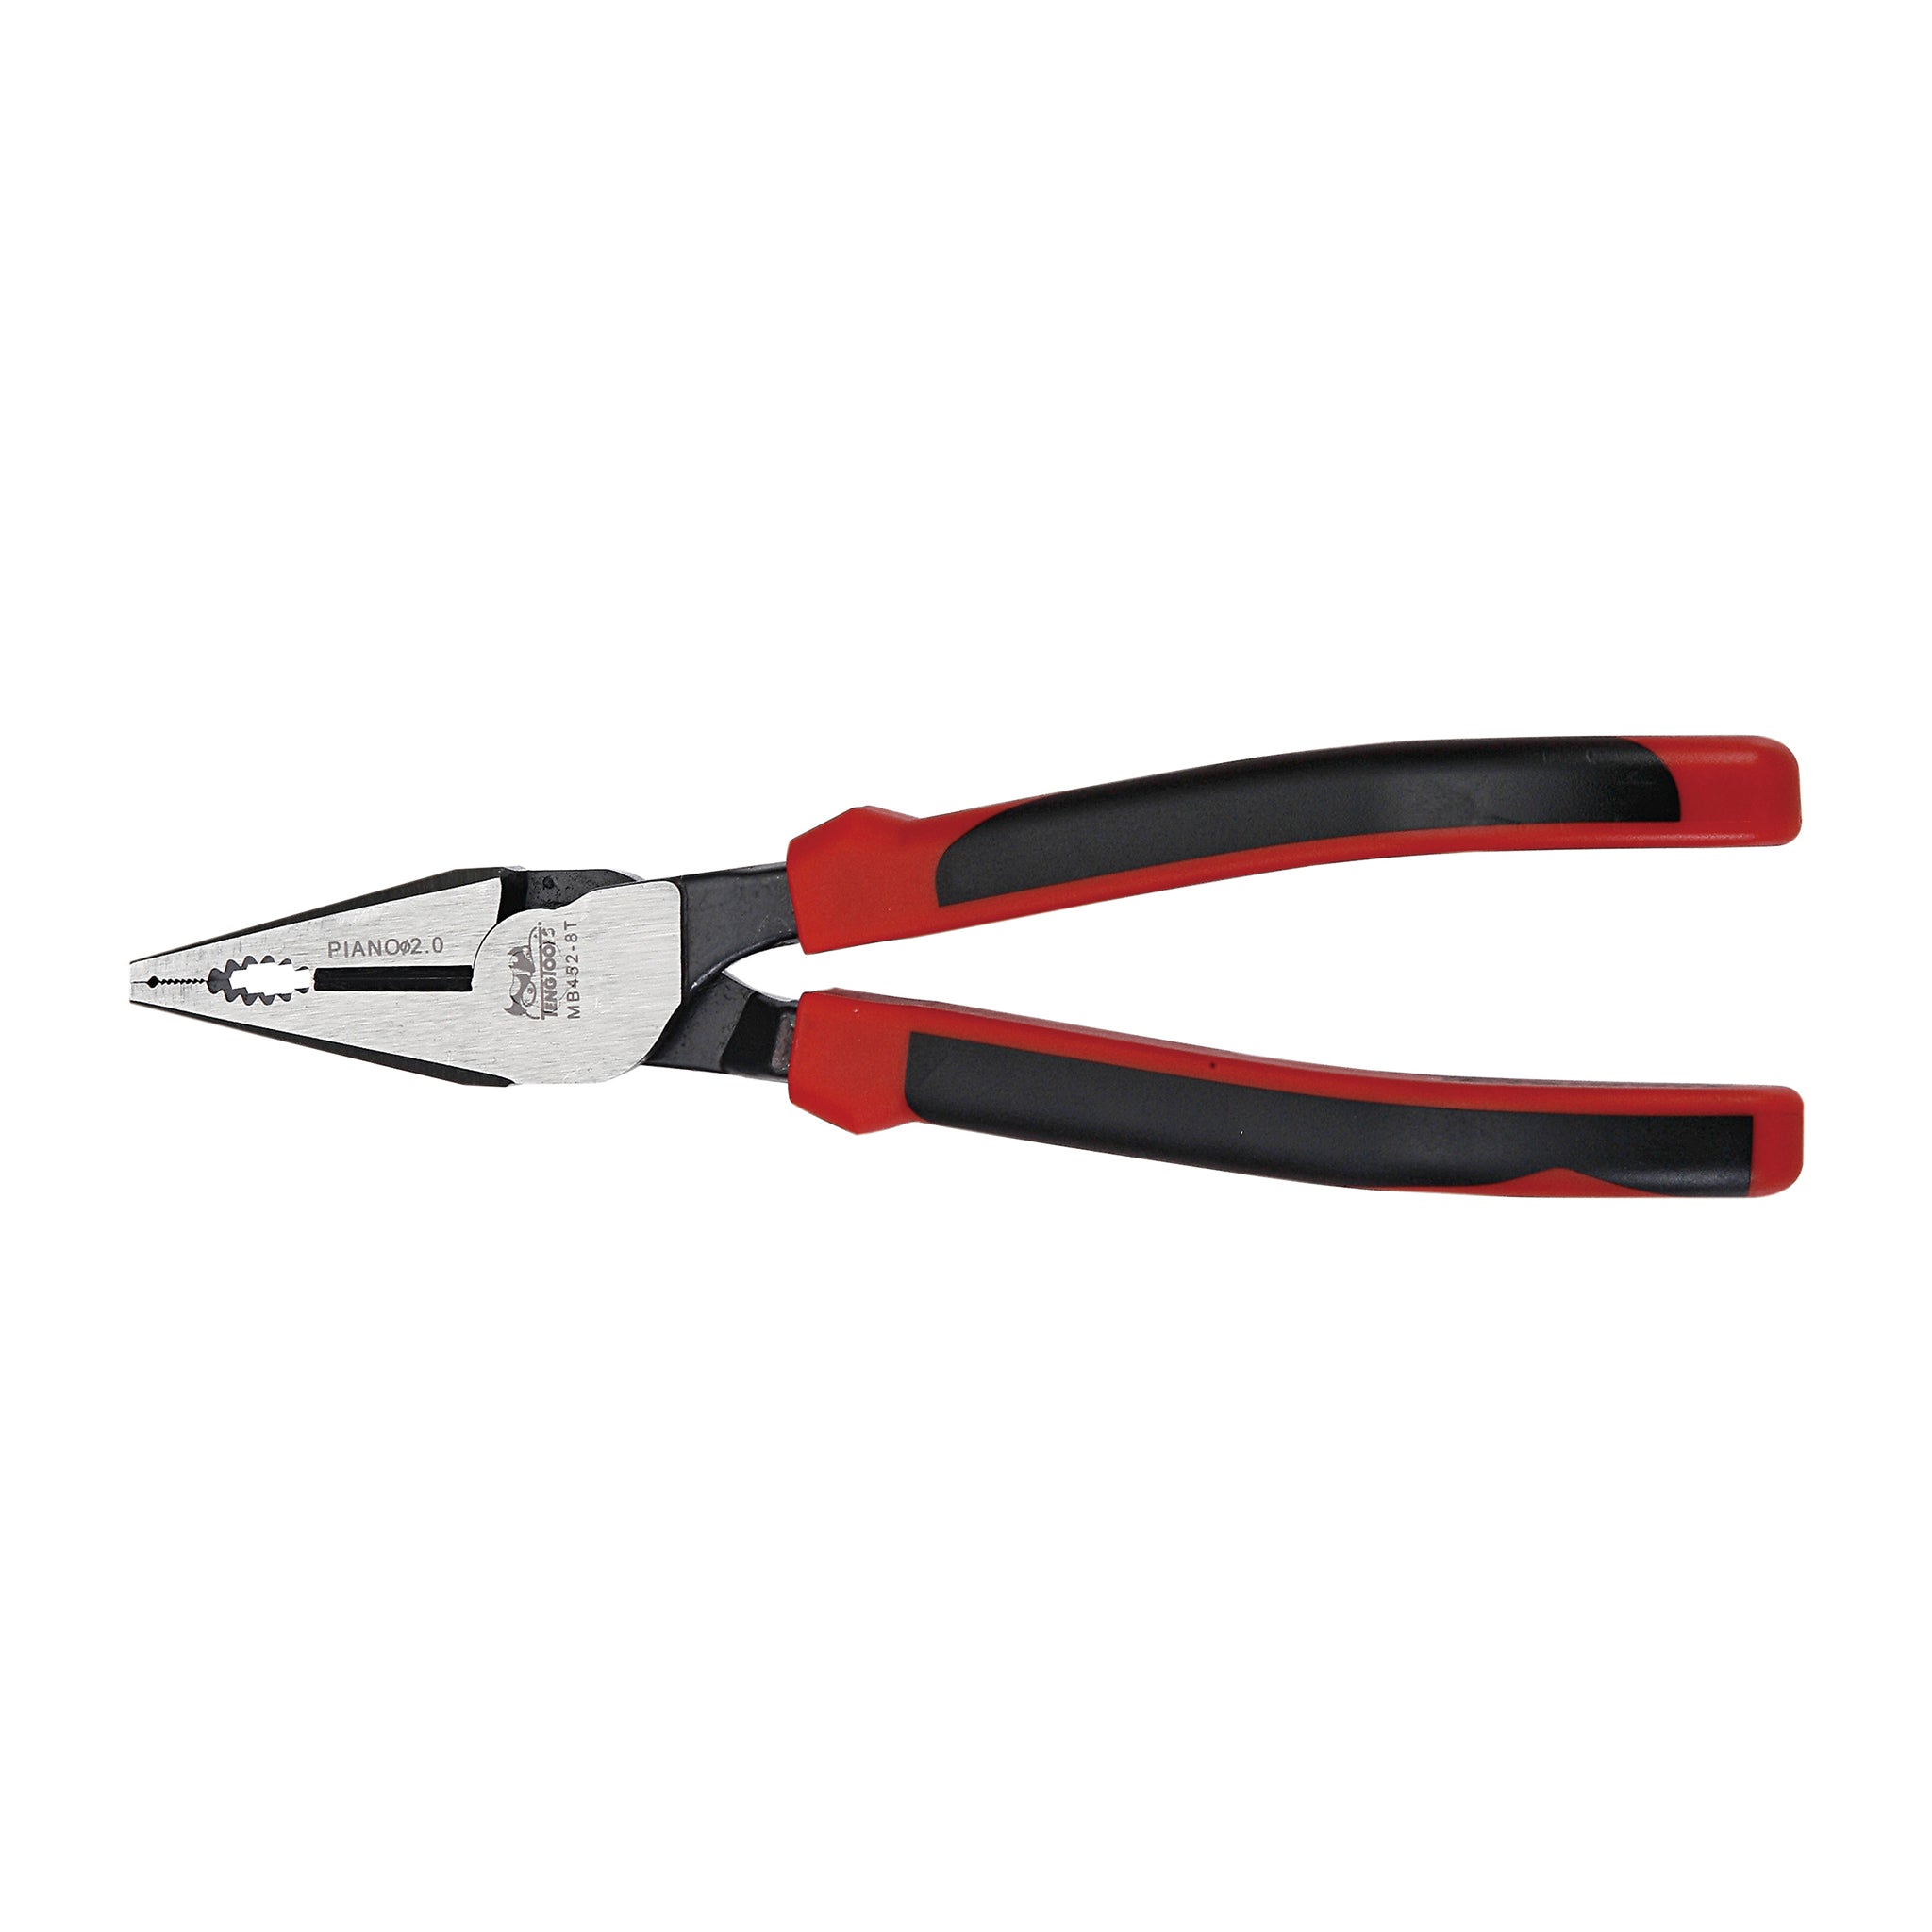 Teng Tools Combination Pliers With TPR Handles - 7